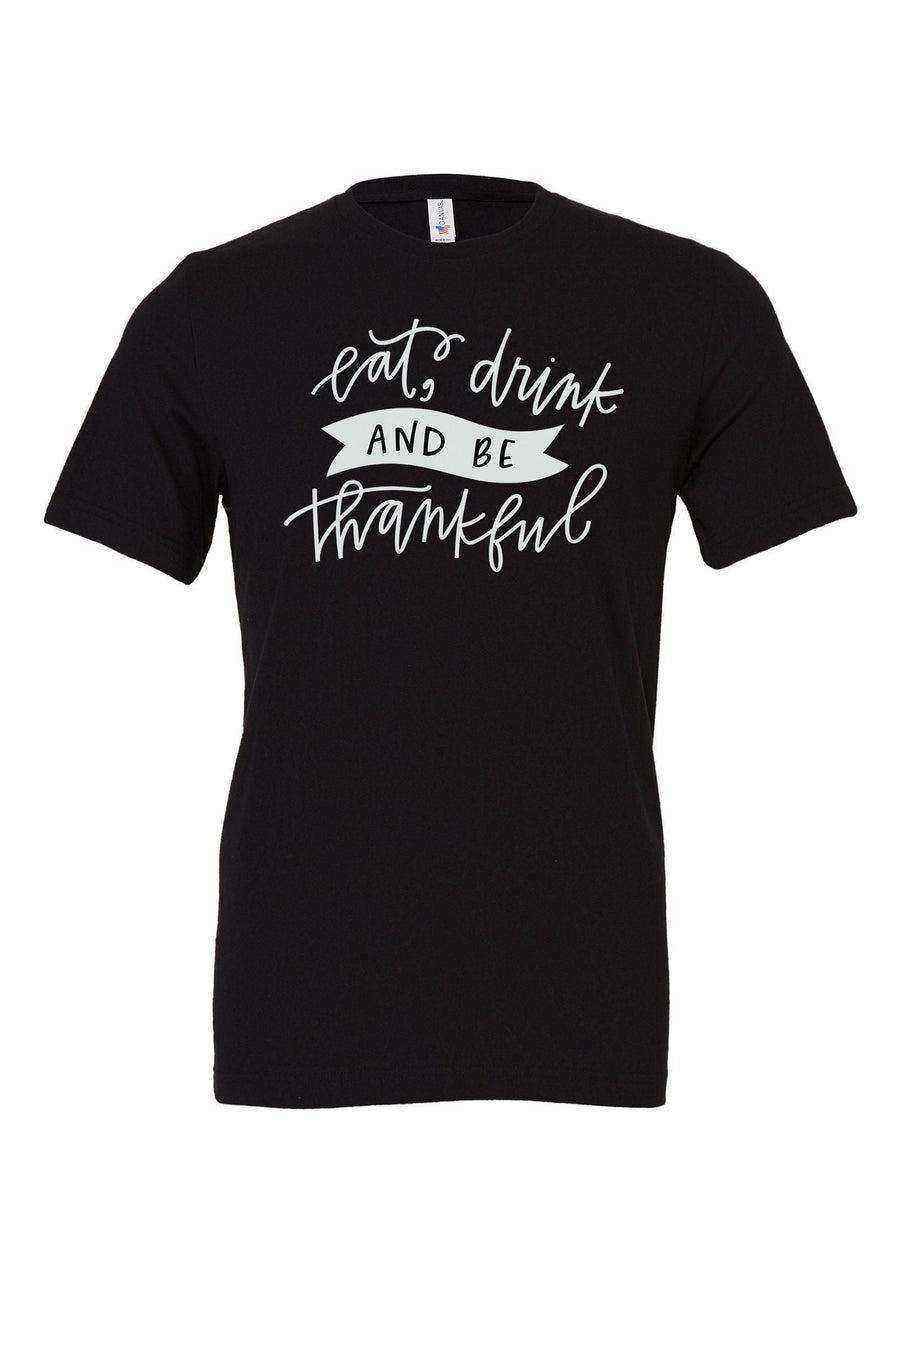 Youth | Eat Drink and Be Thankful Shirt - Dylan's Tees